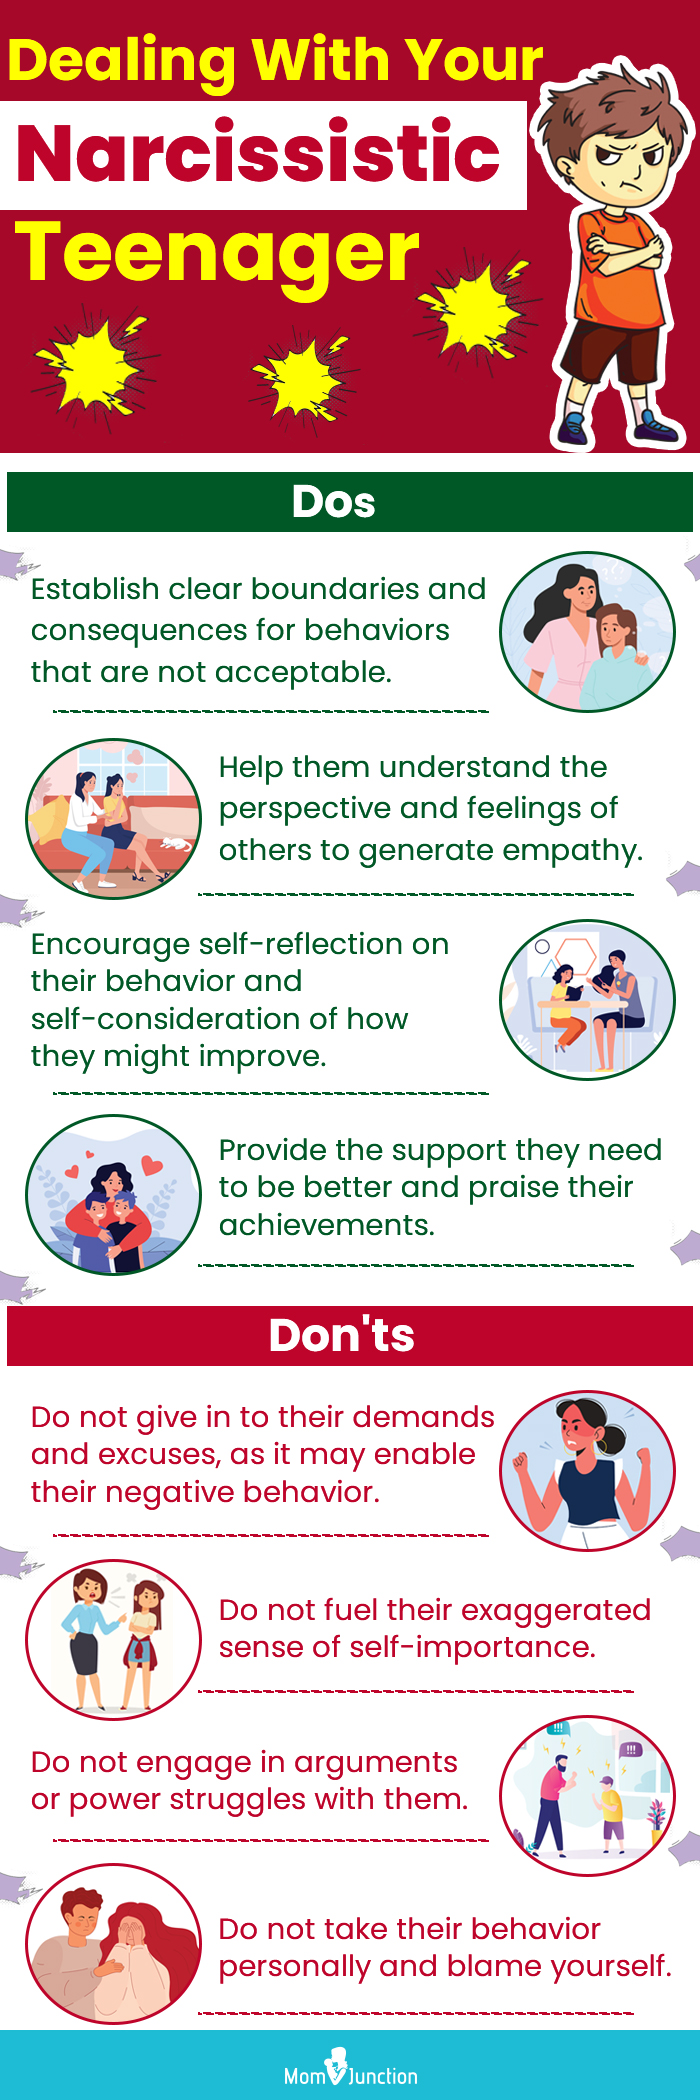 dealing with your narcissistic teenager (infographic)